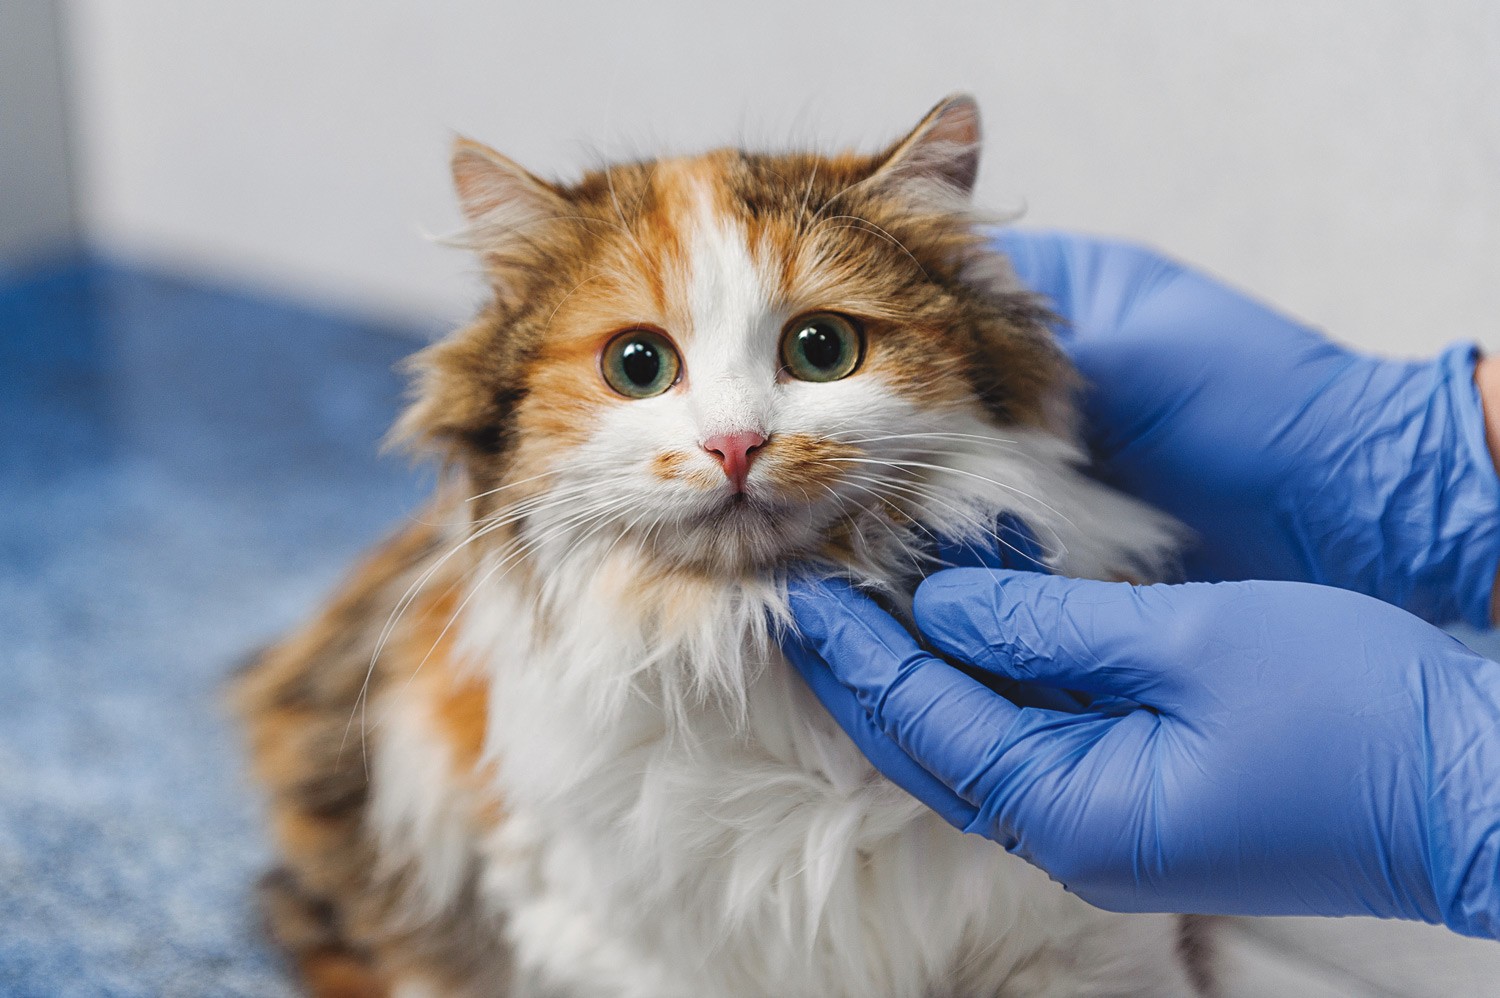 Tips to avoid a panicked vet visit